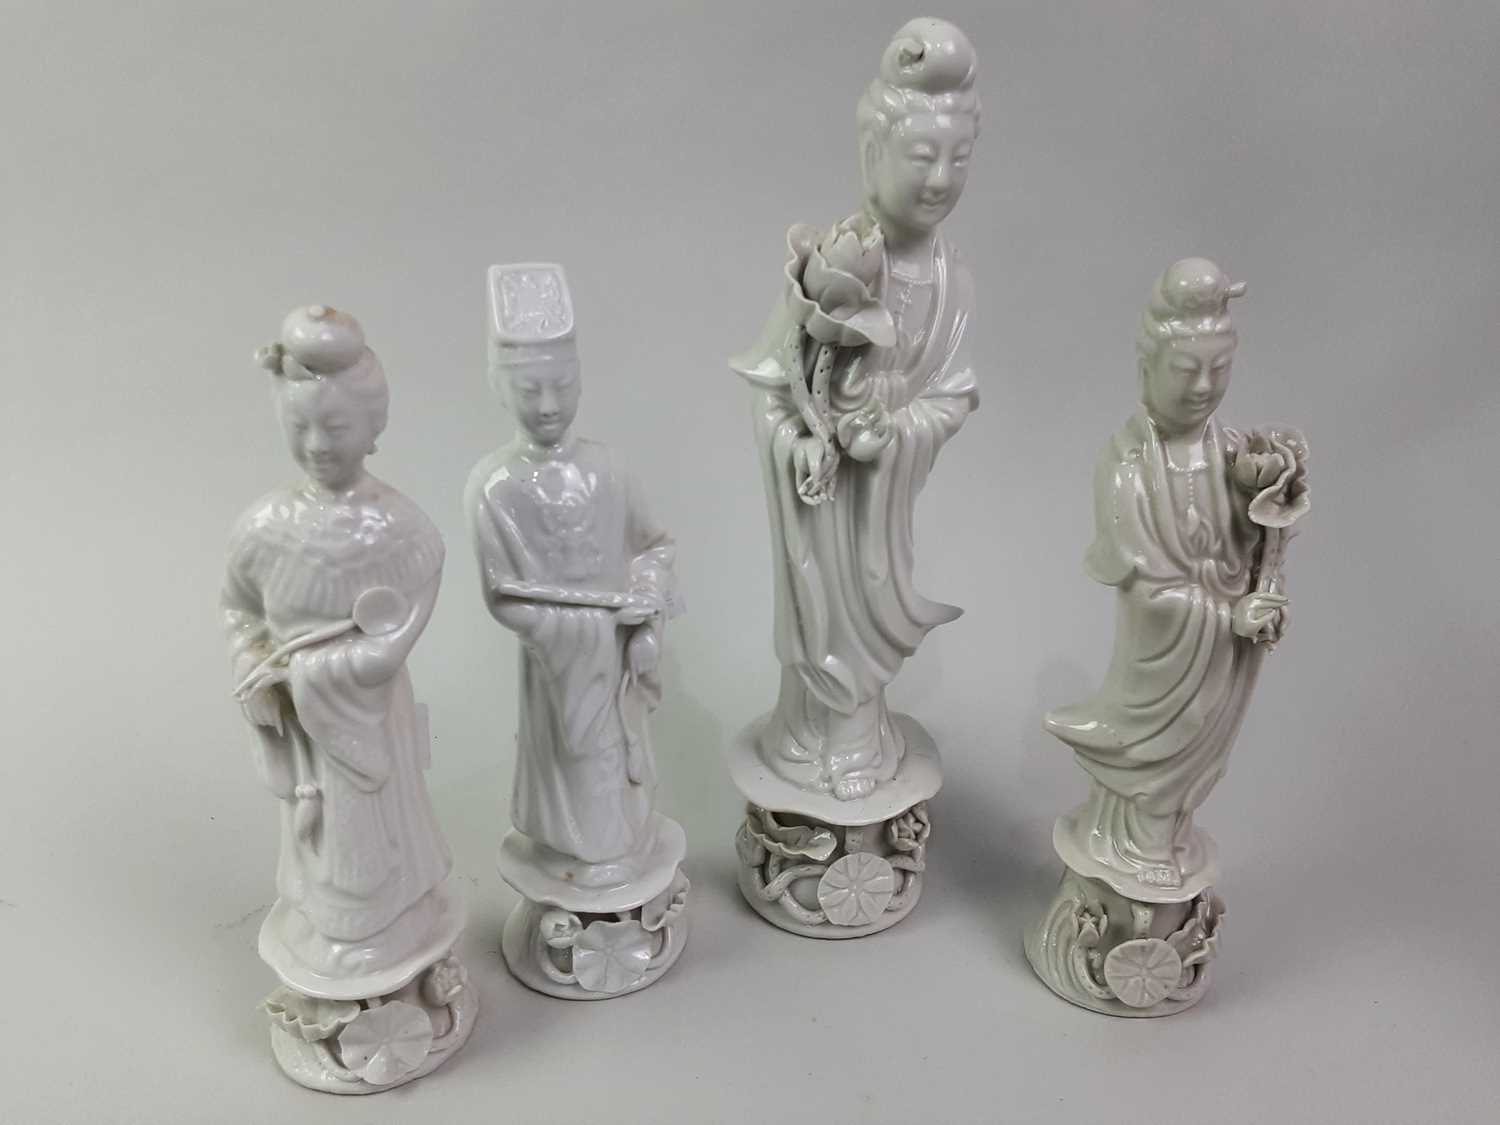 LARGE GROUP OF CHINESE BLANC DE CHINE FIGURES, 20TH CENTURY - Image 3 of 4